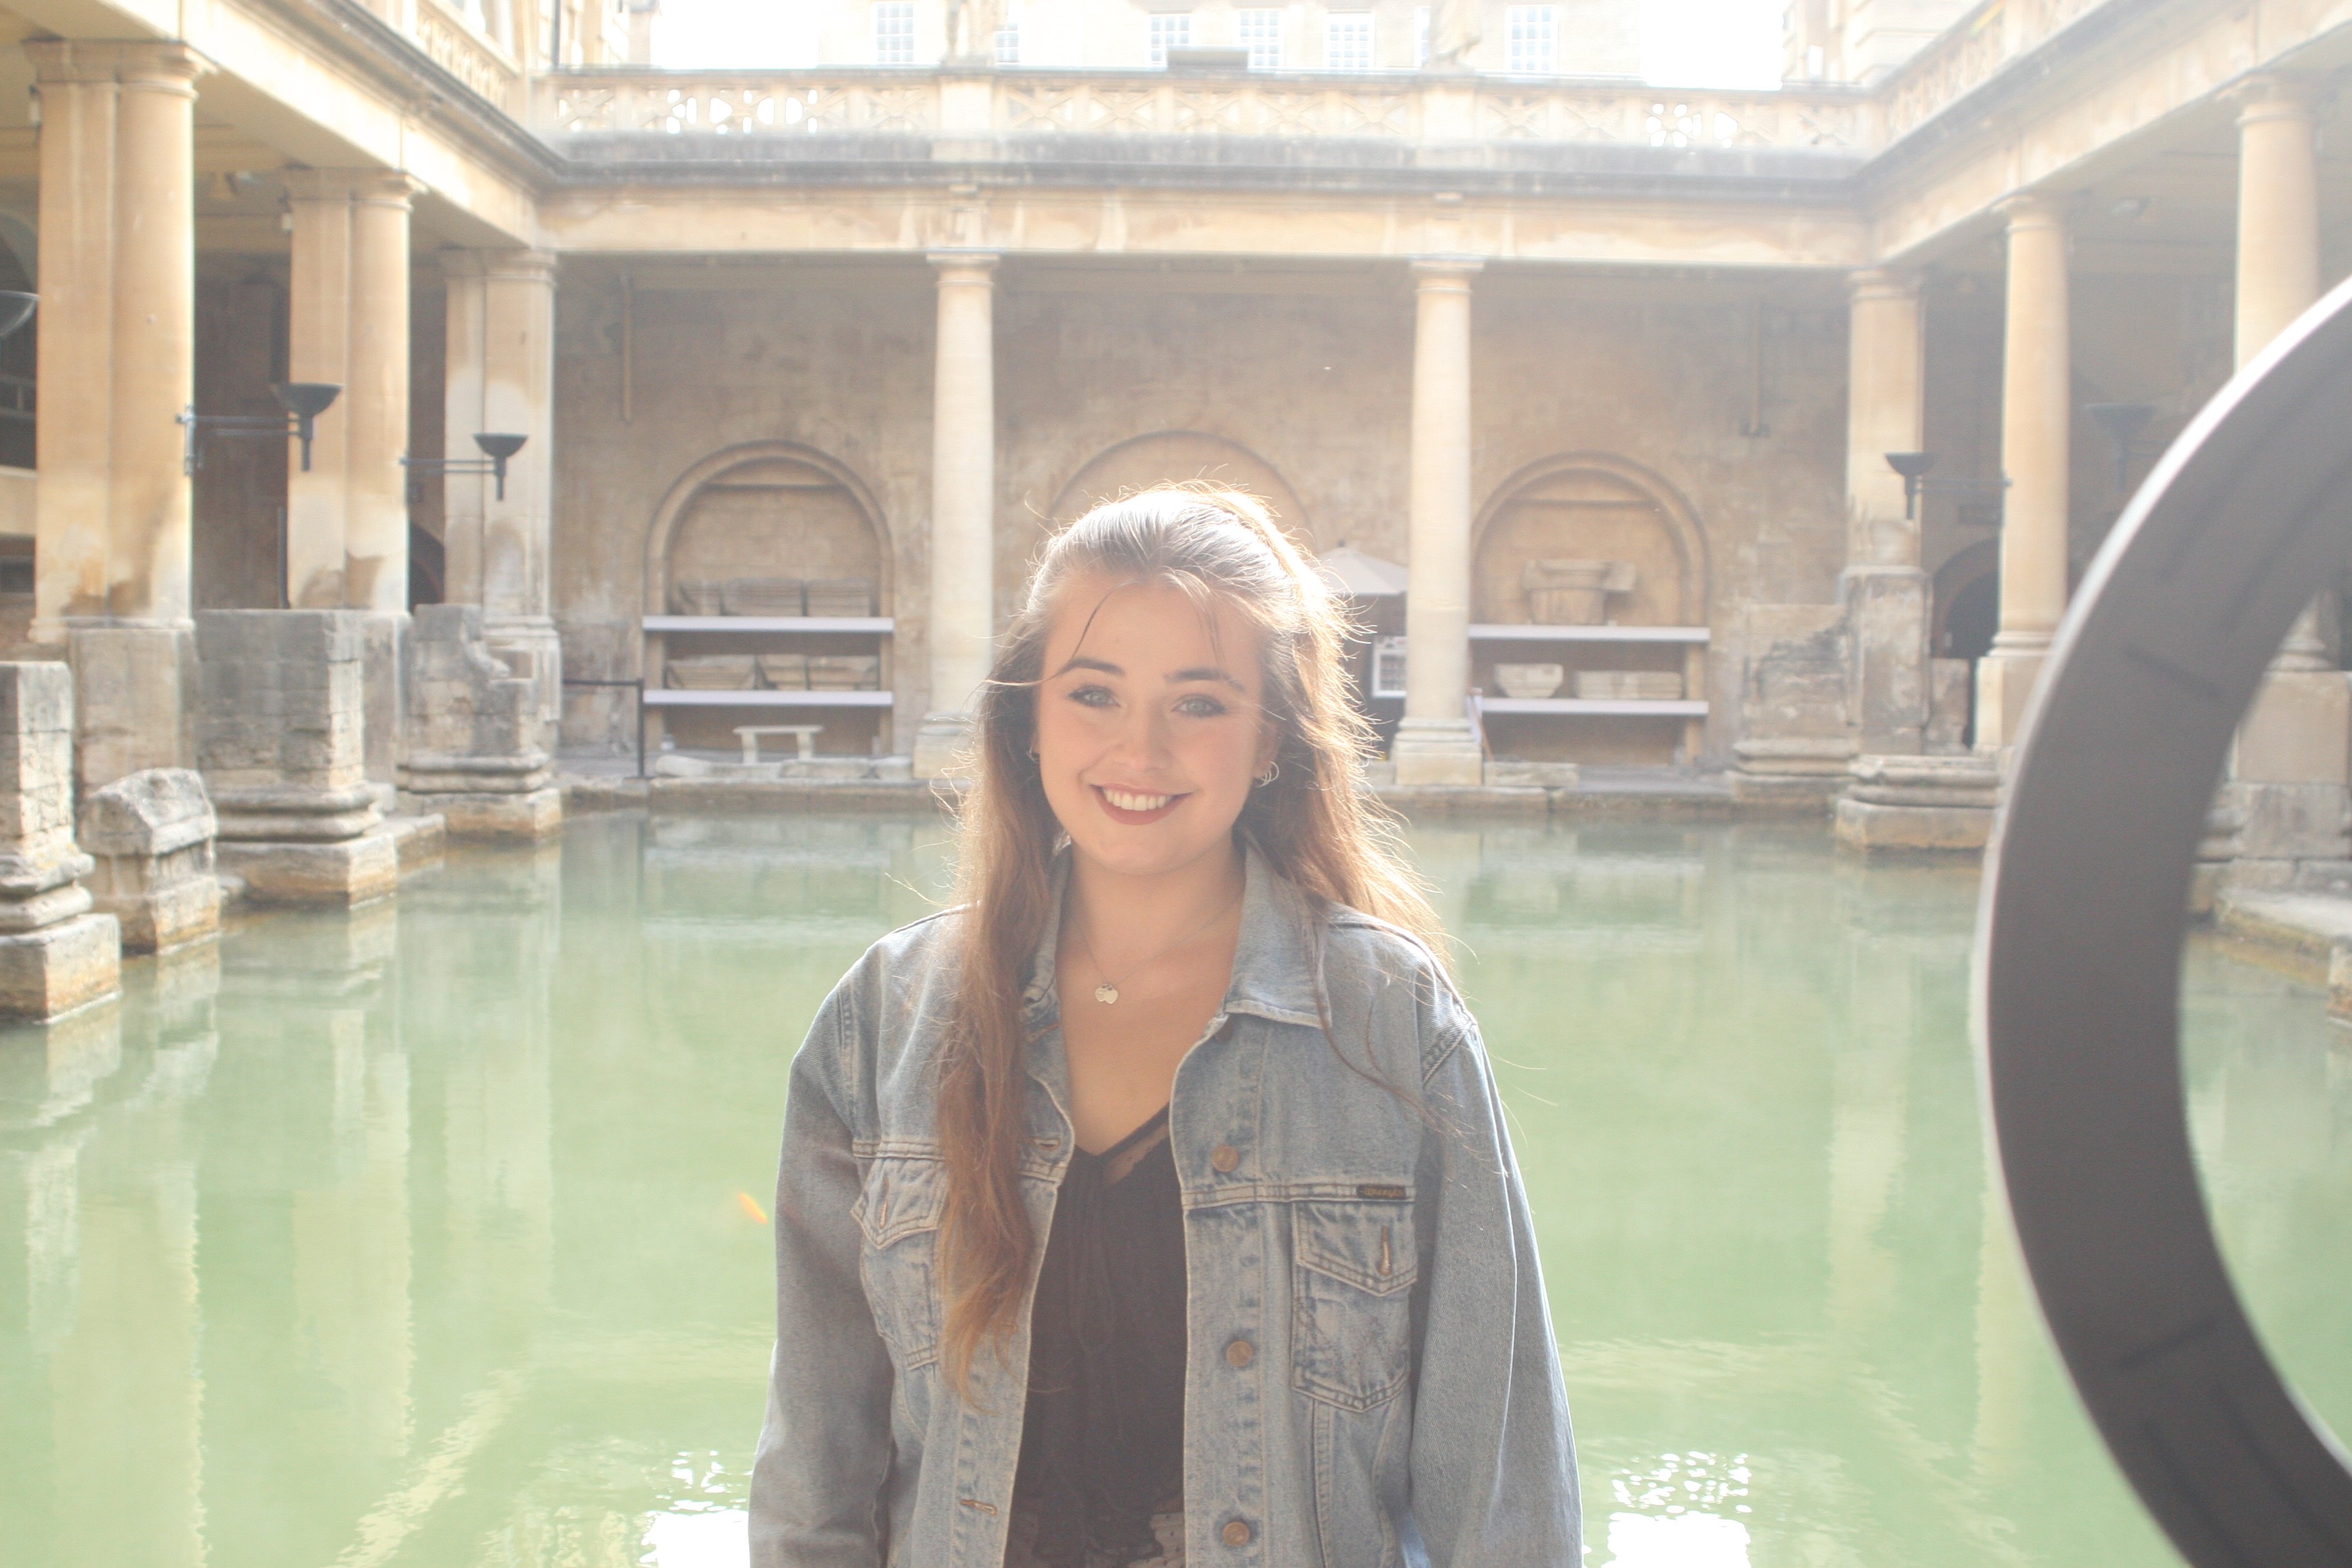 Tallulah standing in front of a Roman bath